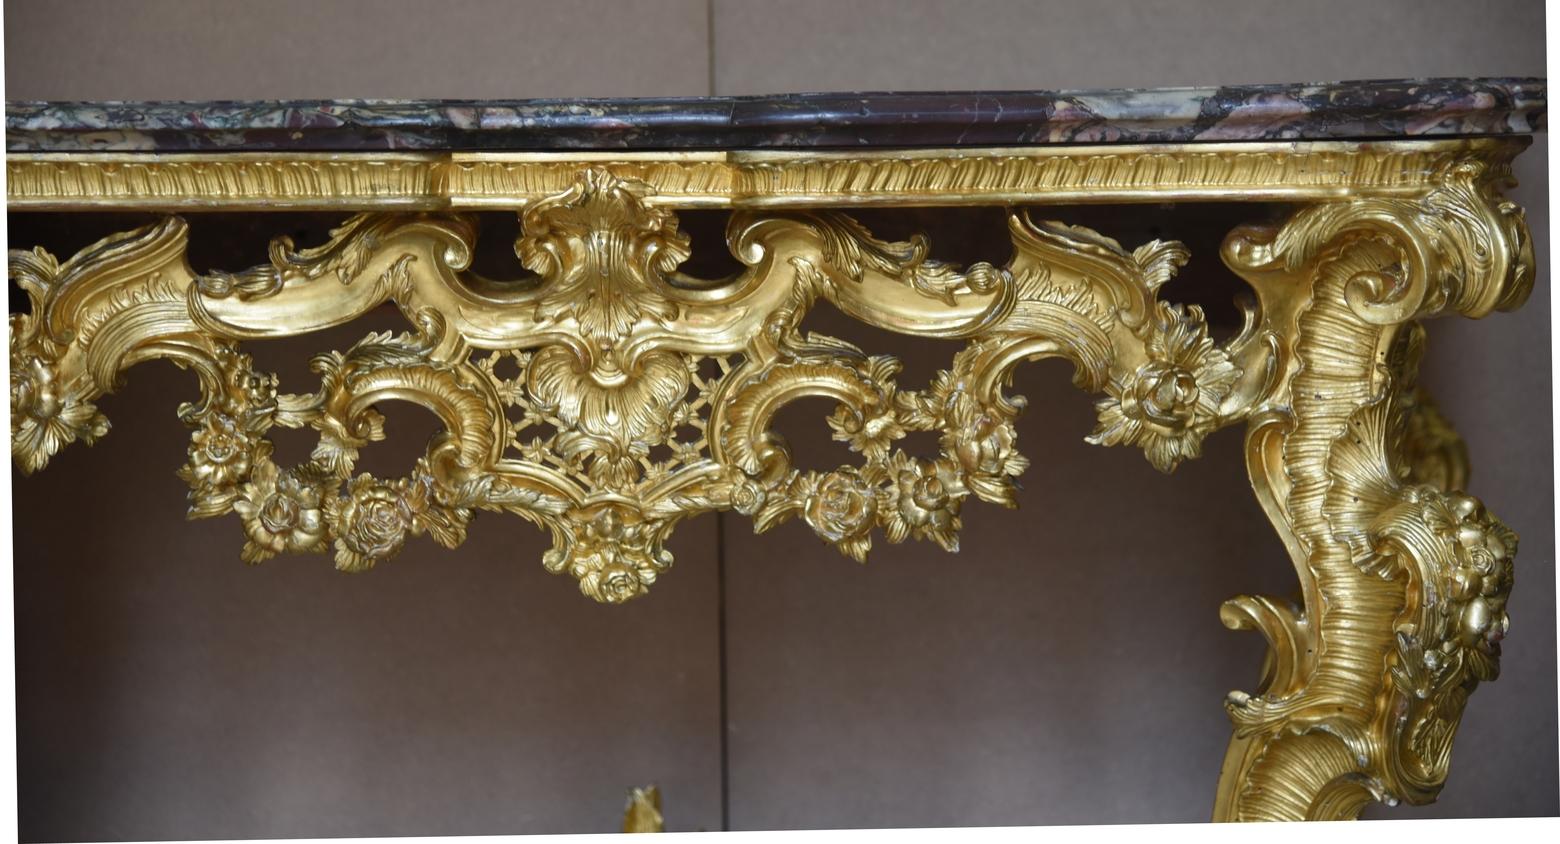 Ancient 18th century console, in carved and gilded wood with gold leaf, derived from a probable design by Gregorio Petondi (Petondi Giovanni Angelo Gregorio. - He was born in Castel San Pietro, a town in the Muggio valley, at the foot of the Alps,